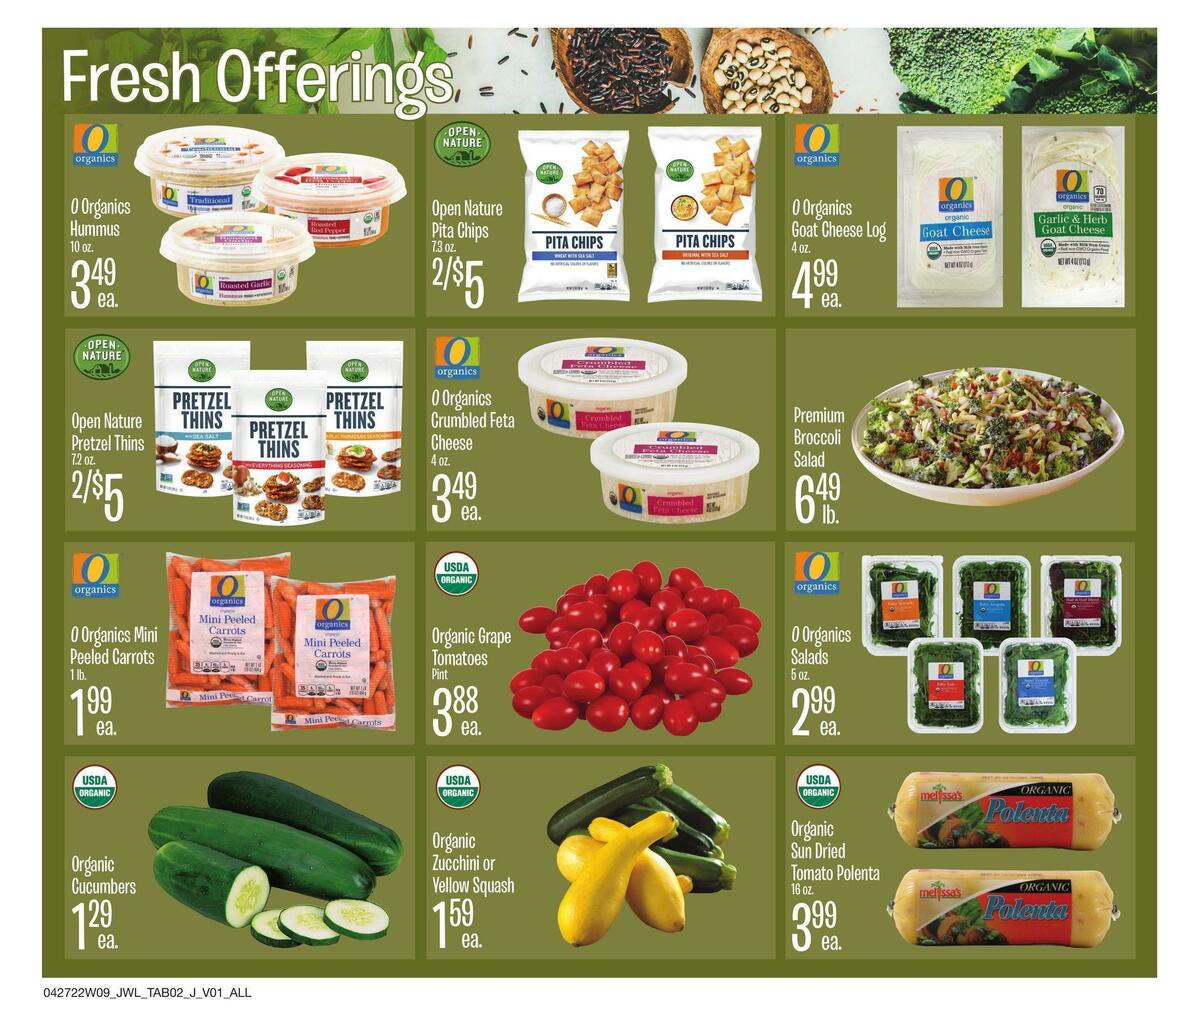 Jewel Osco Natural & Organic Weekly Ad from April 27